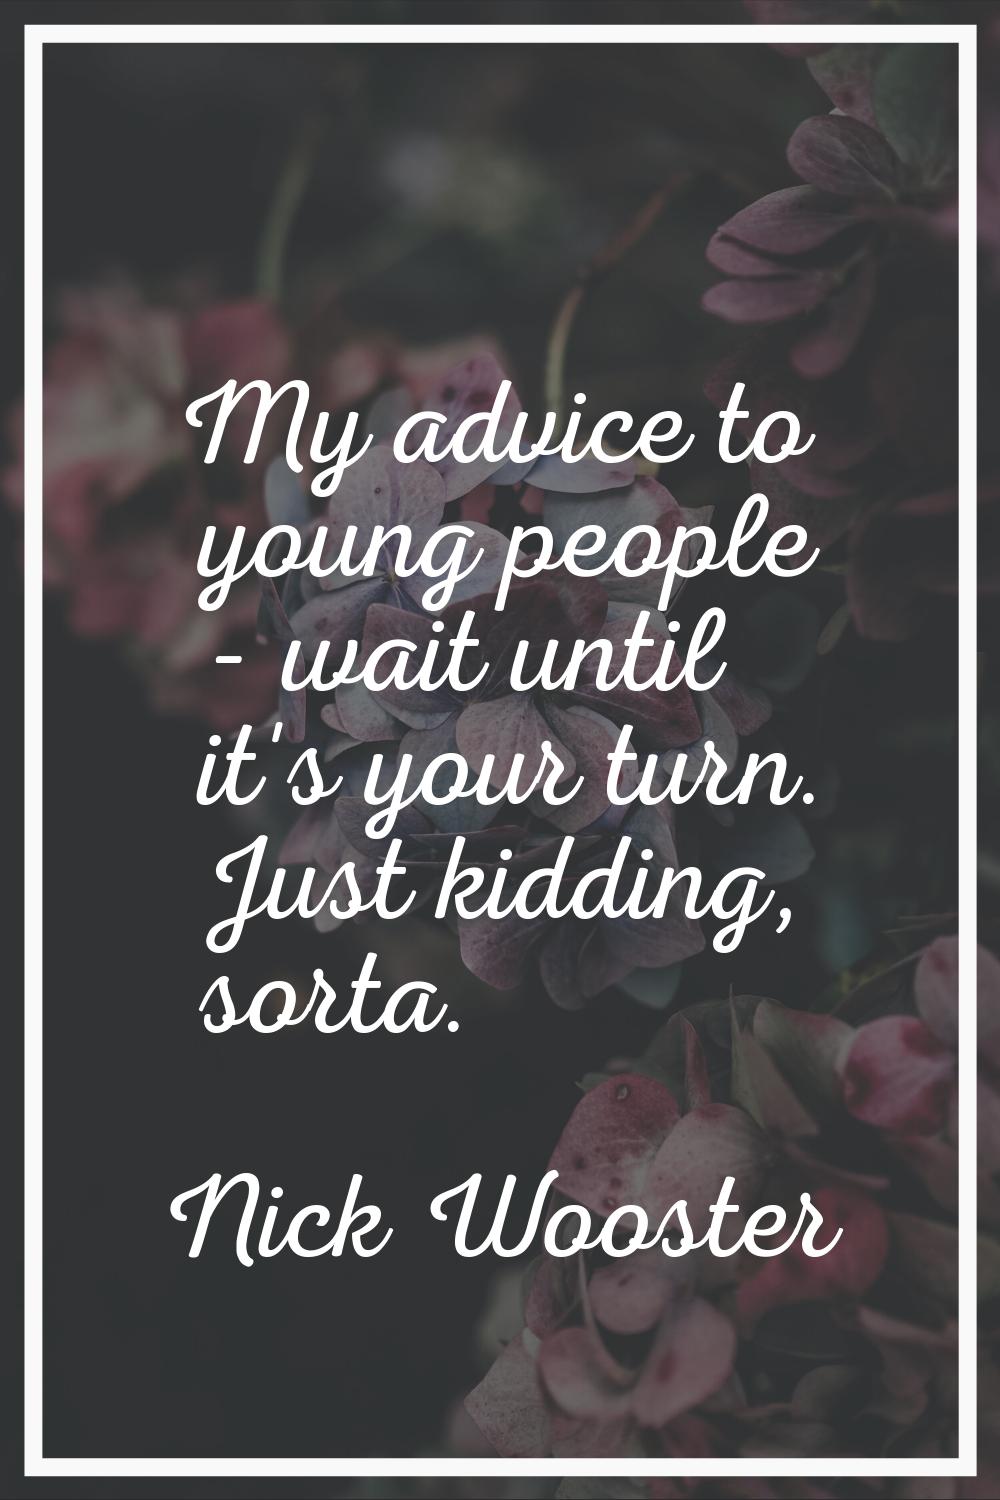 My advice to young people - wait until it's your turn. Just kidding, sorta.